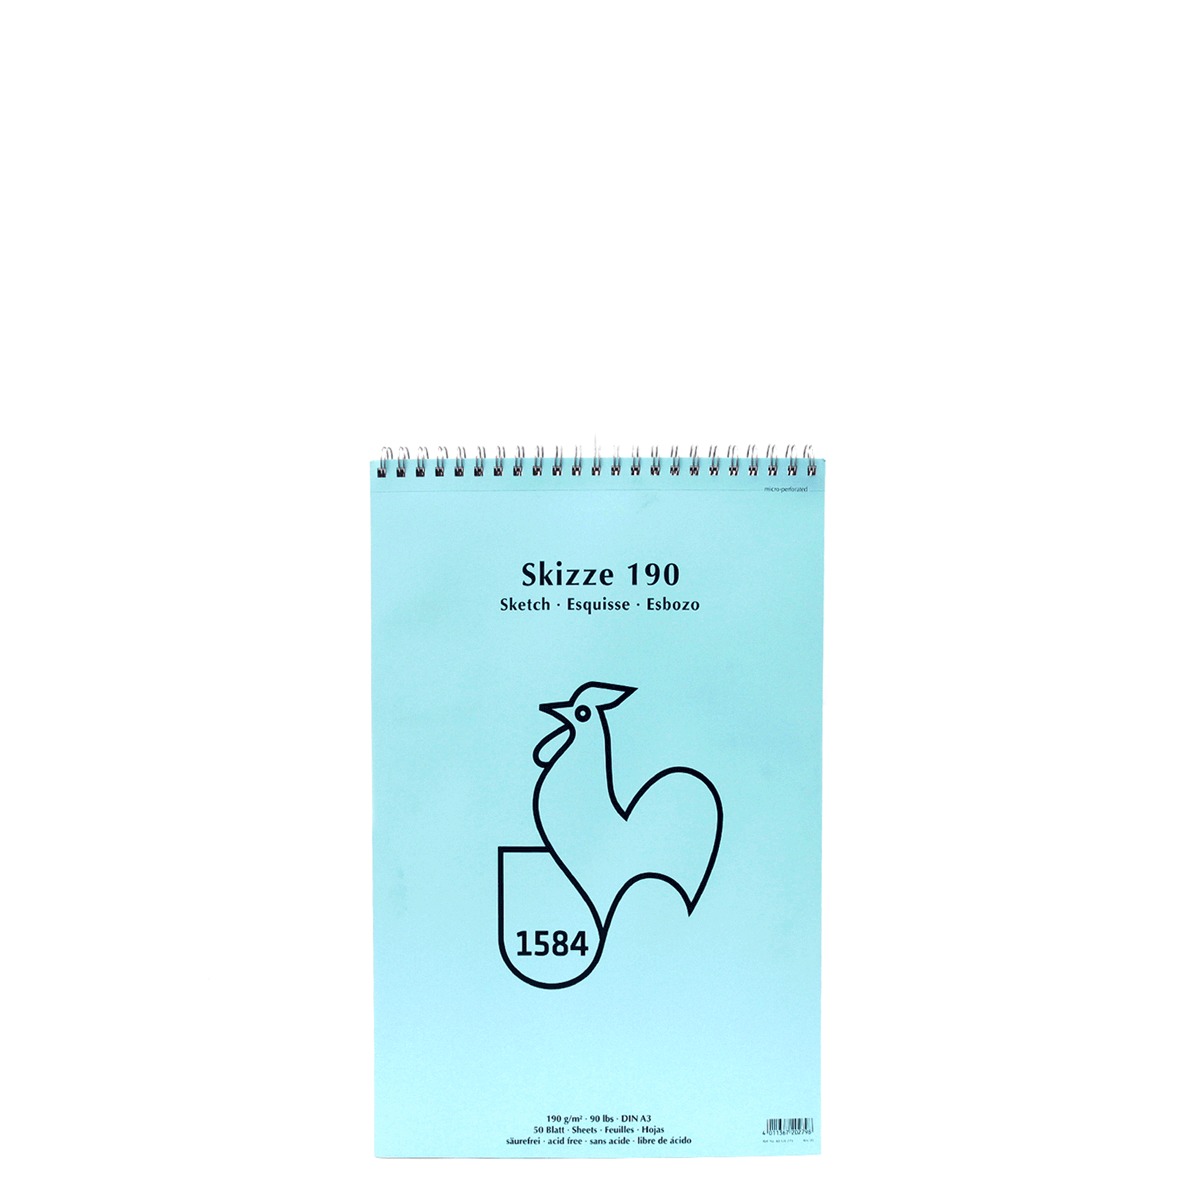 CUADERNO DE DIBUJO HAHNEMUHLE A4 (BLANCO, 50 HJS.) | Office Depot Mexico